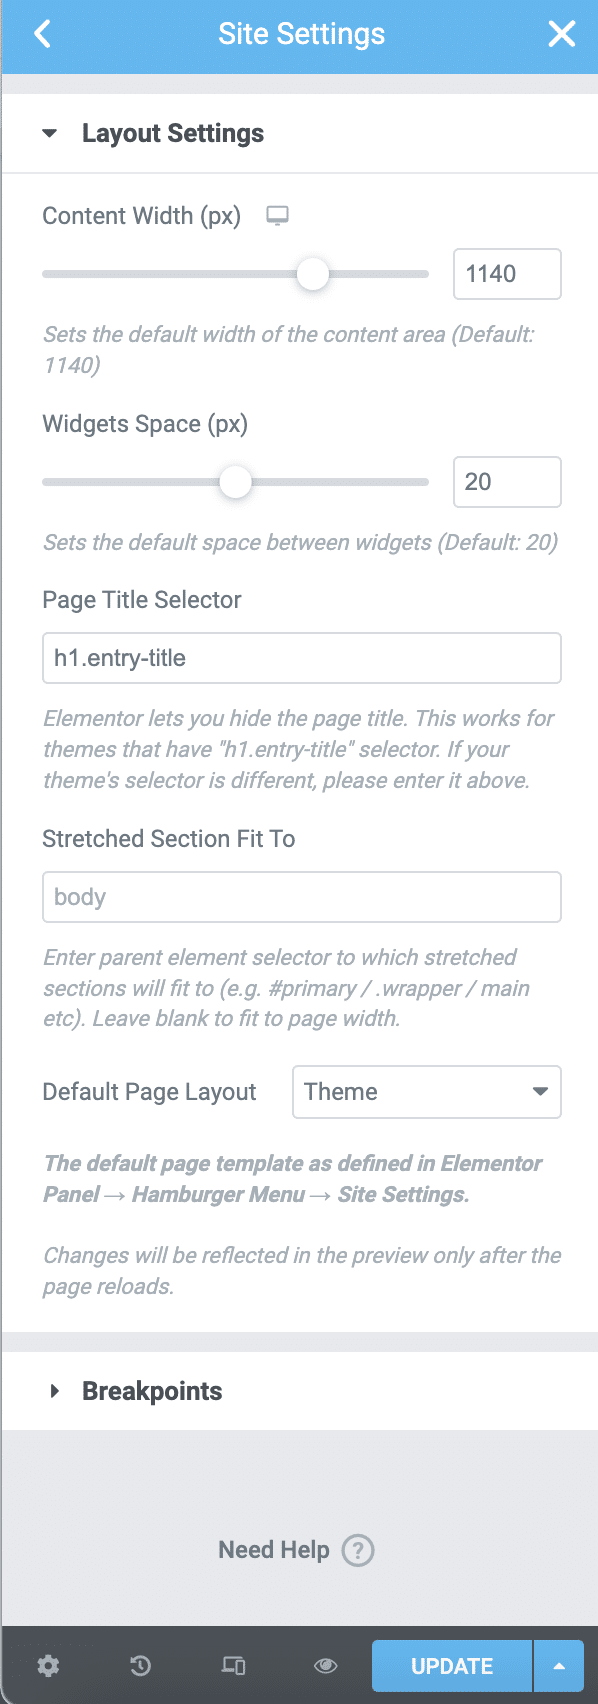 Layout Settings in the Elementor Site Settings.